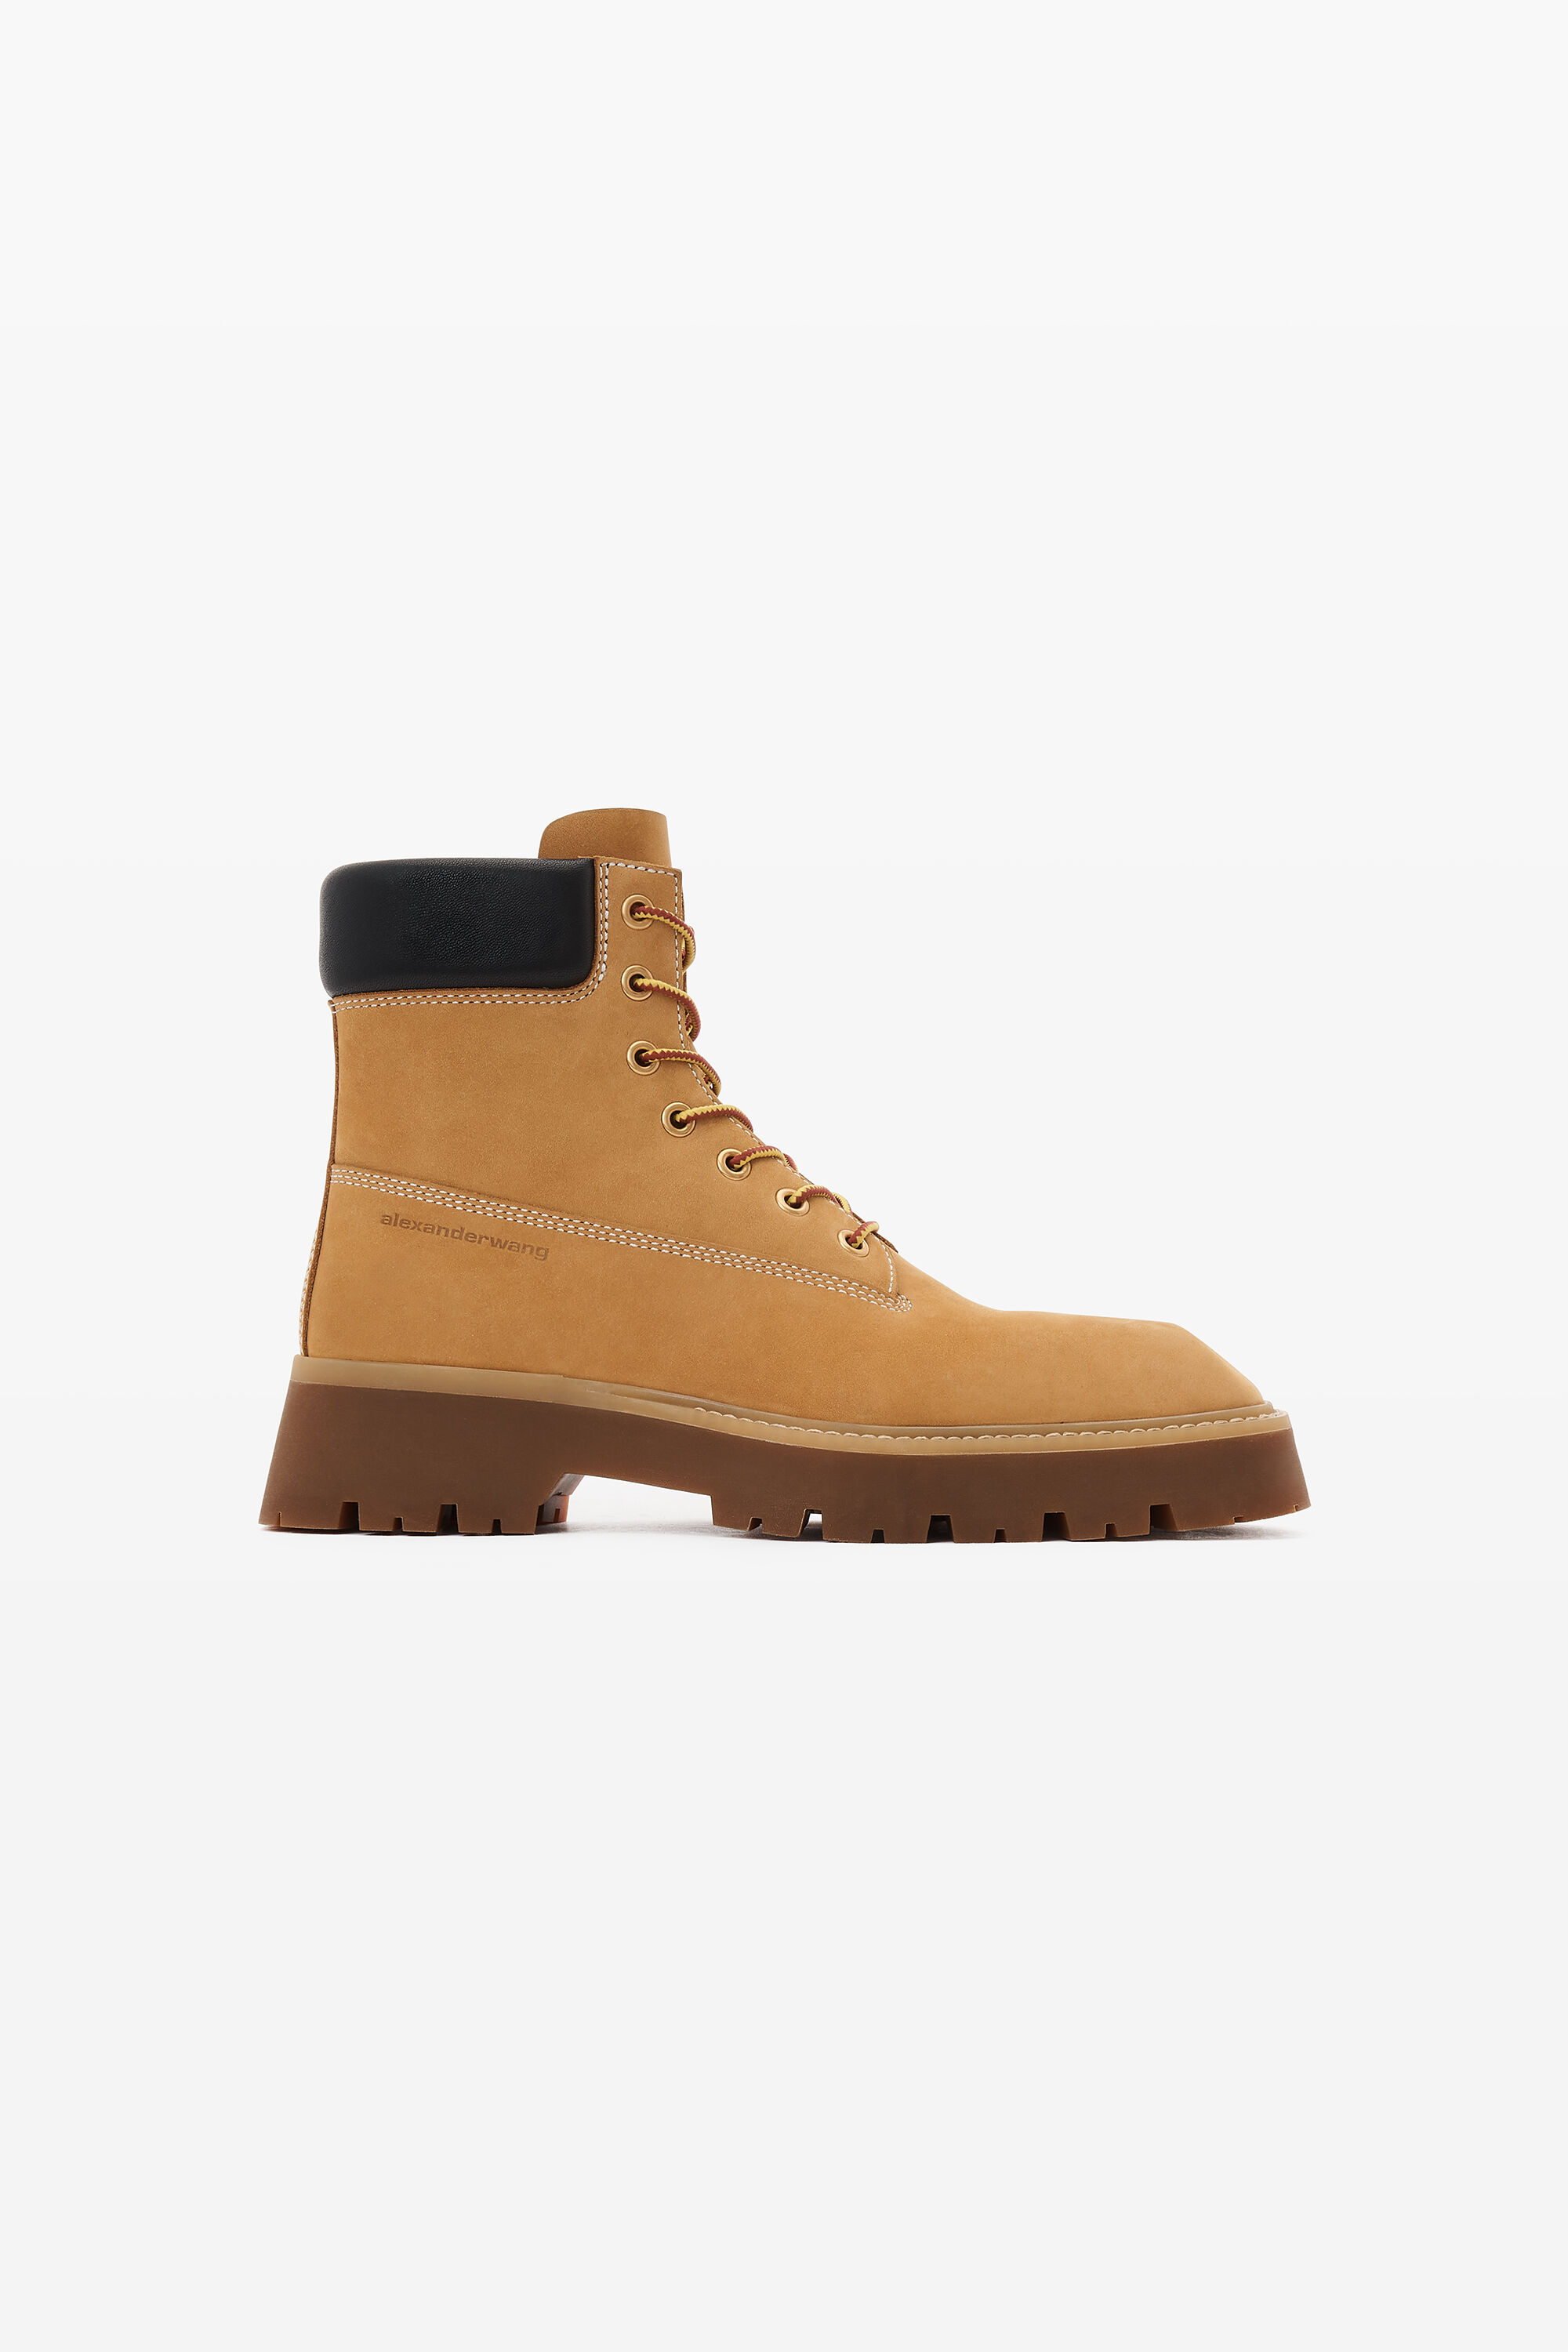 alexanderwang Throttle Lace up Ankle Boot WHEAT 